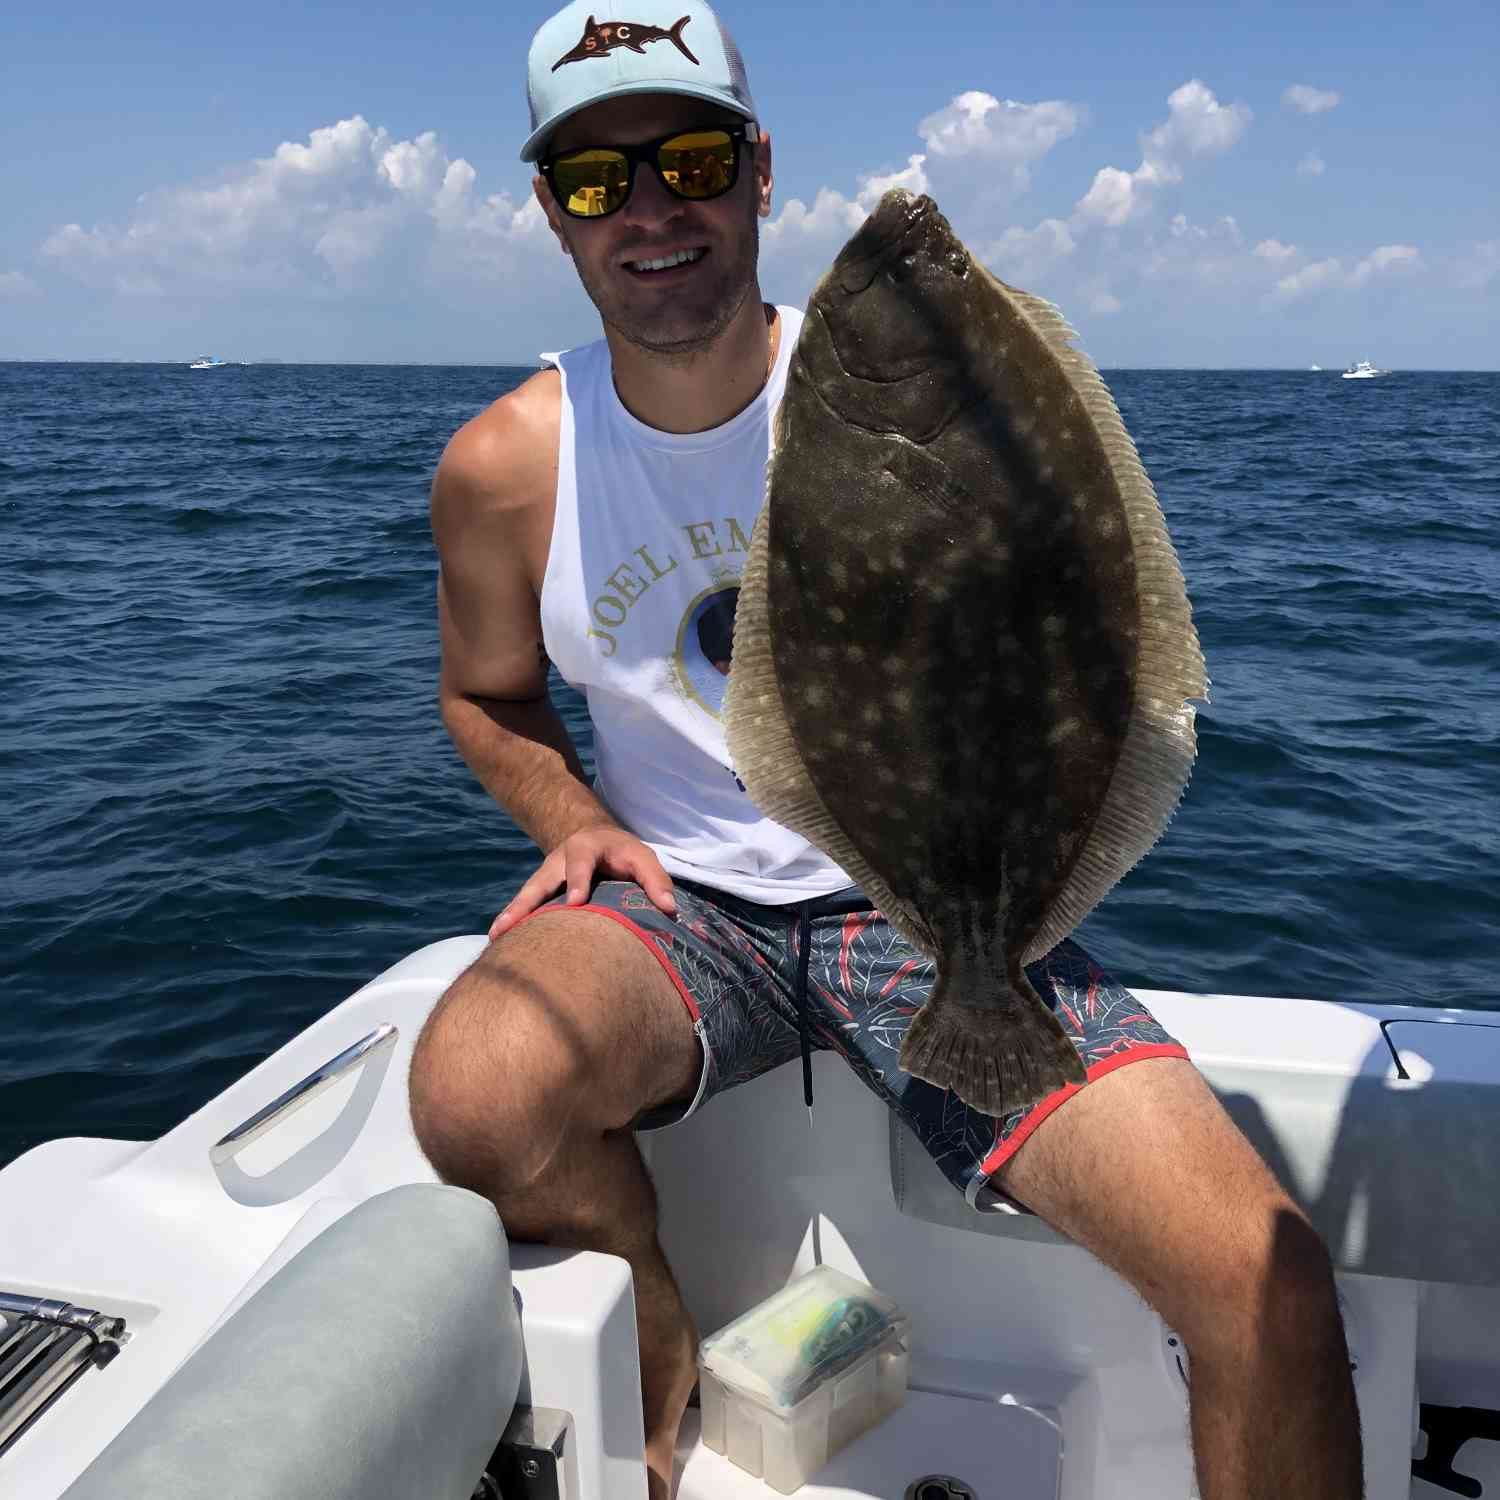 Second year having our Open 212 and finally got our first doormat flounder off of Avalon, NJ at...